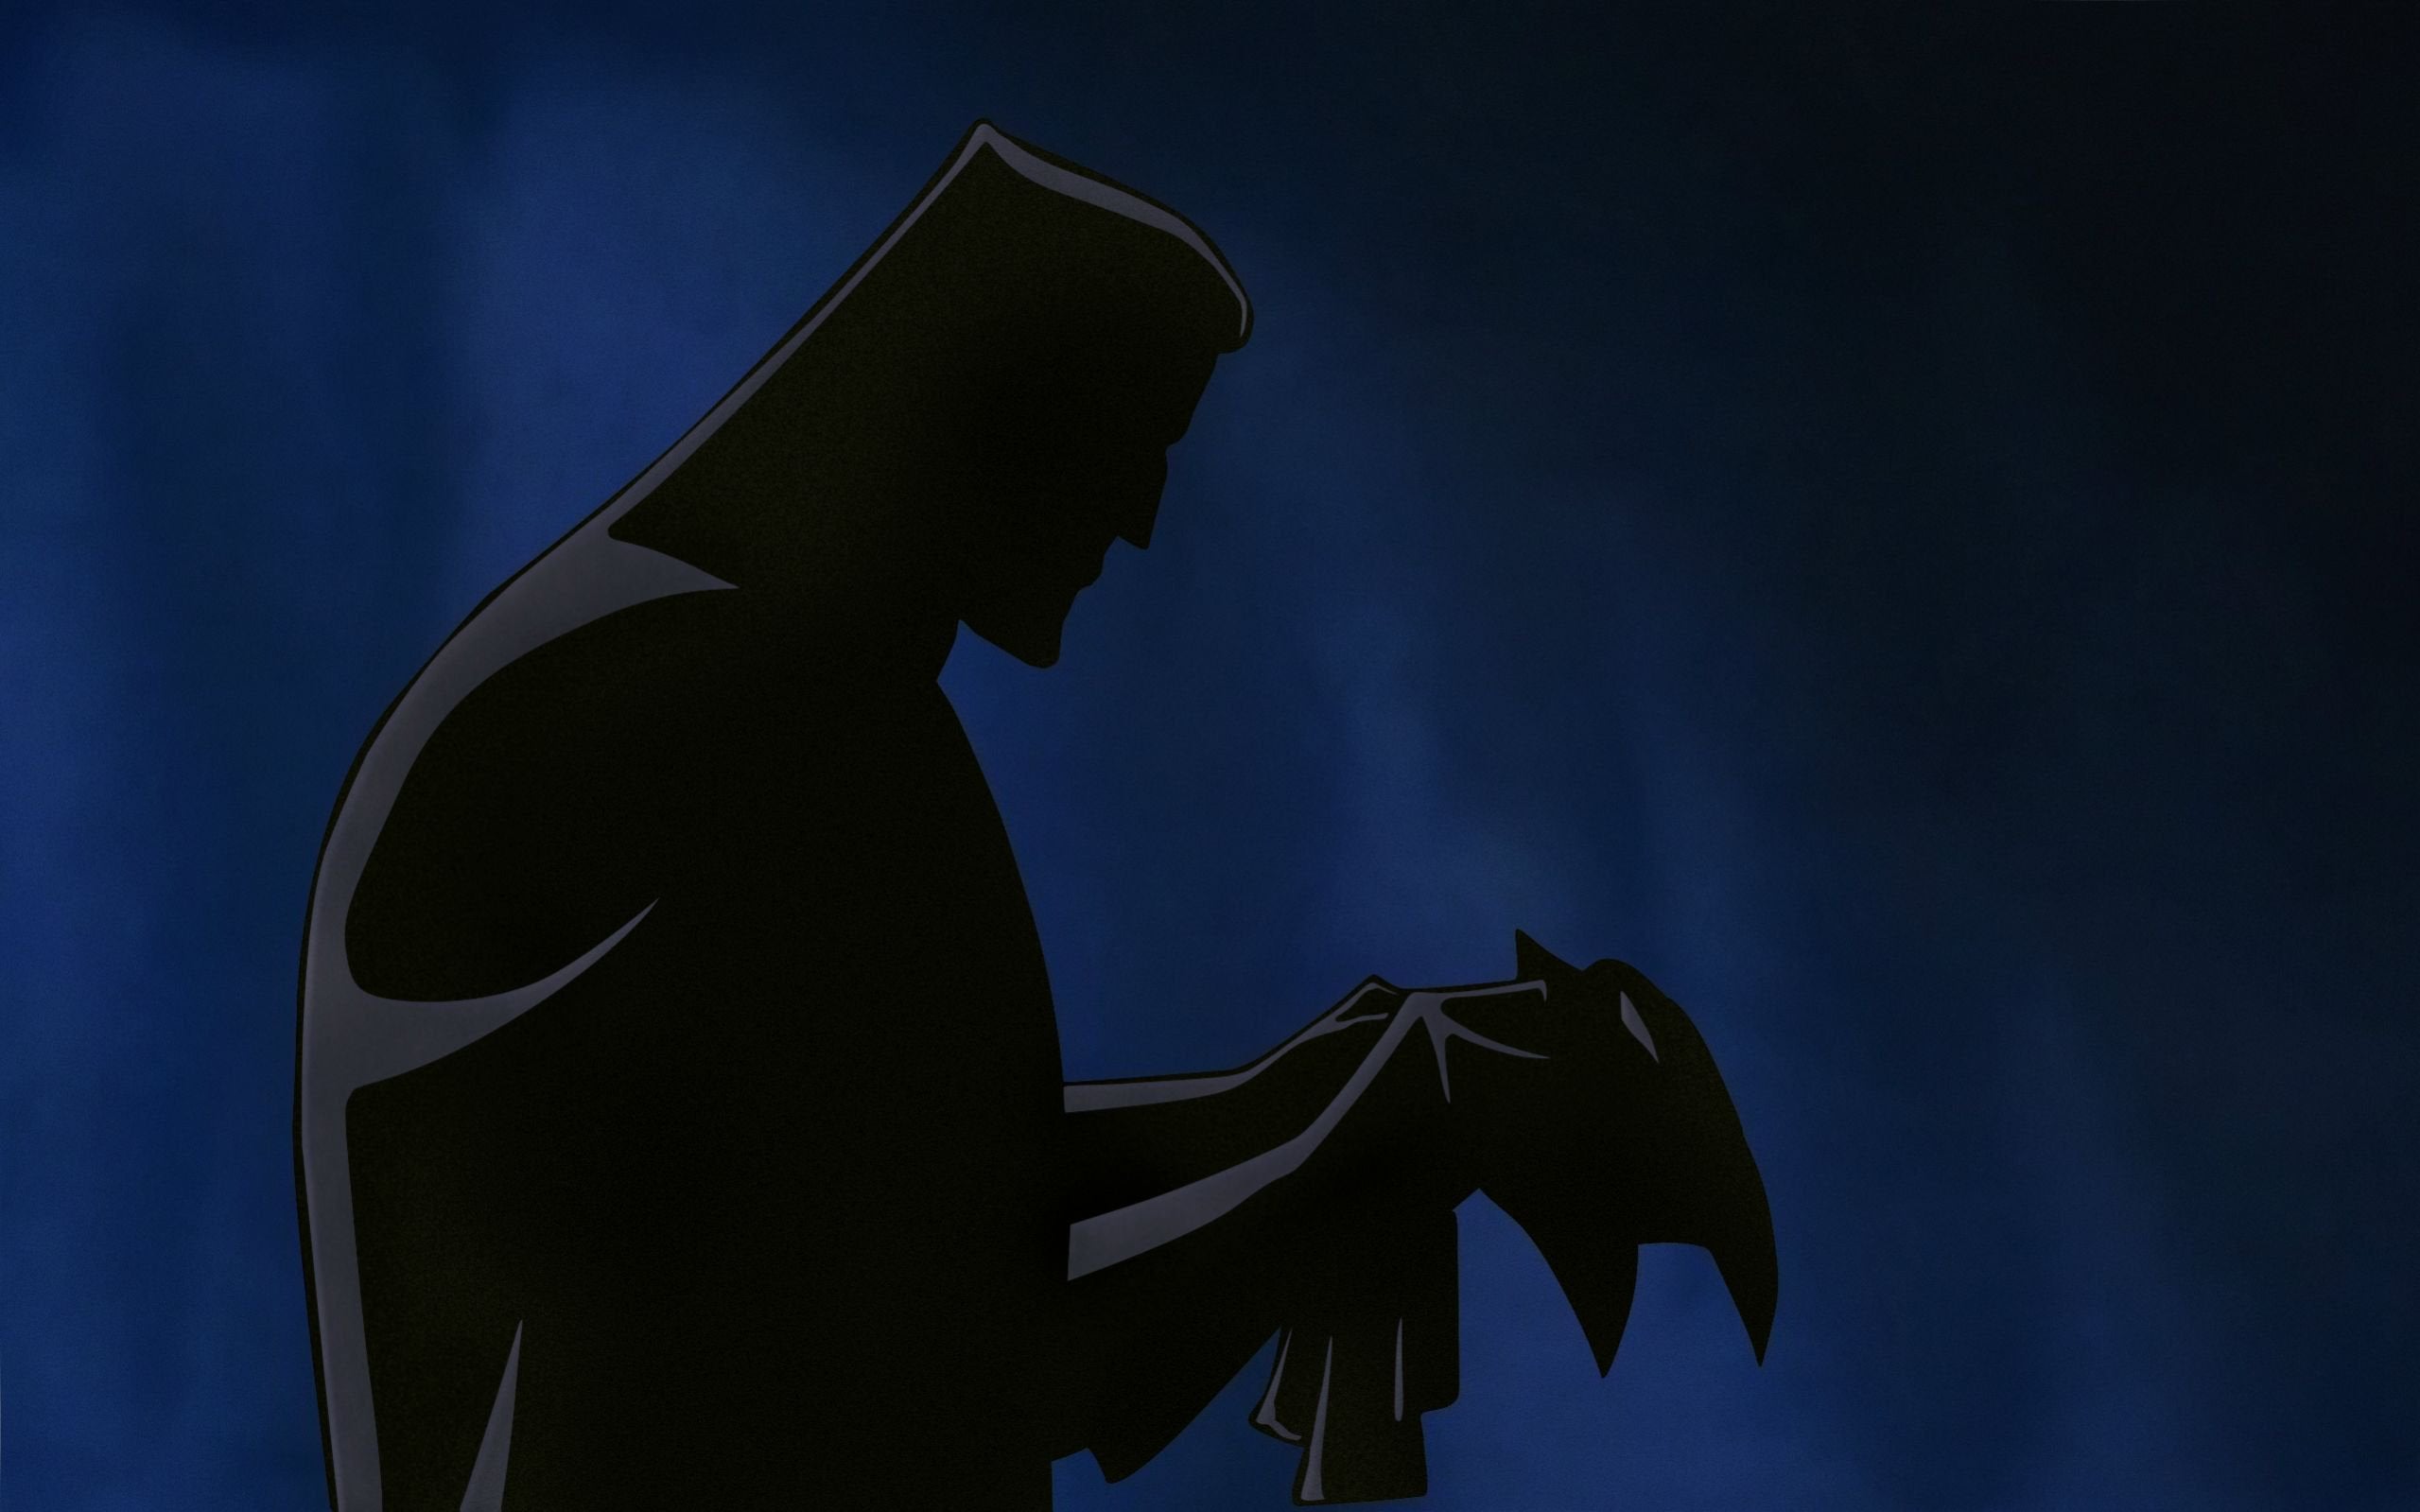 Batman wallpapers I made based on a scene from Mask of the Phantasm: batman.